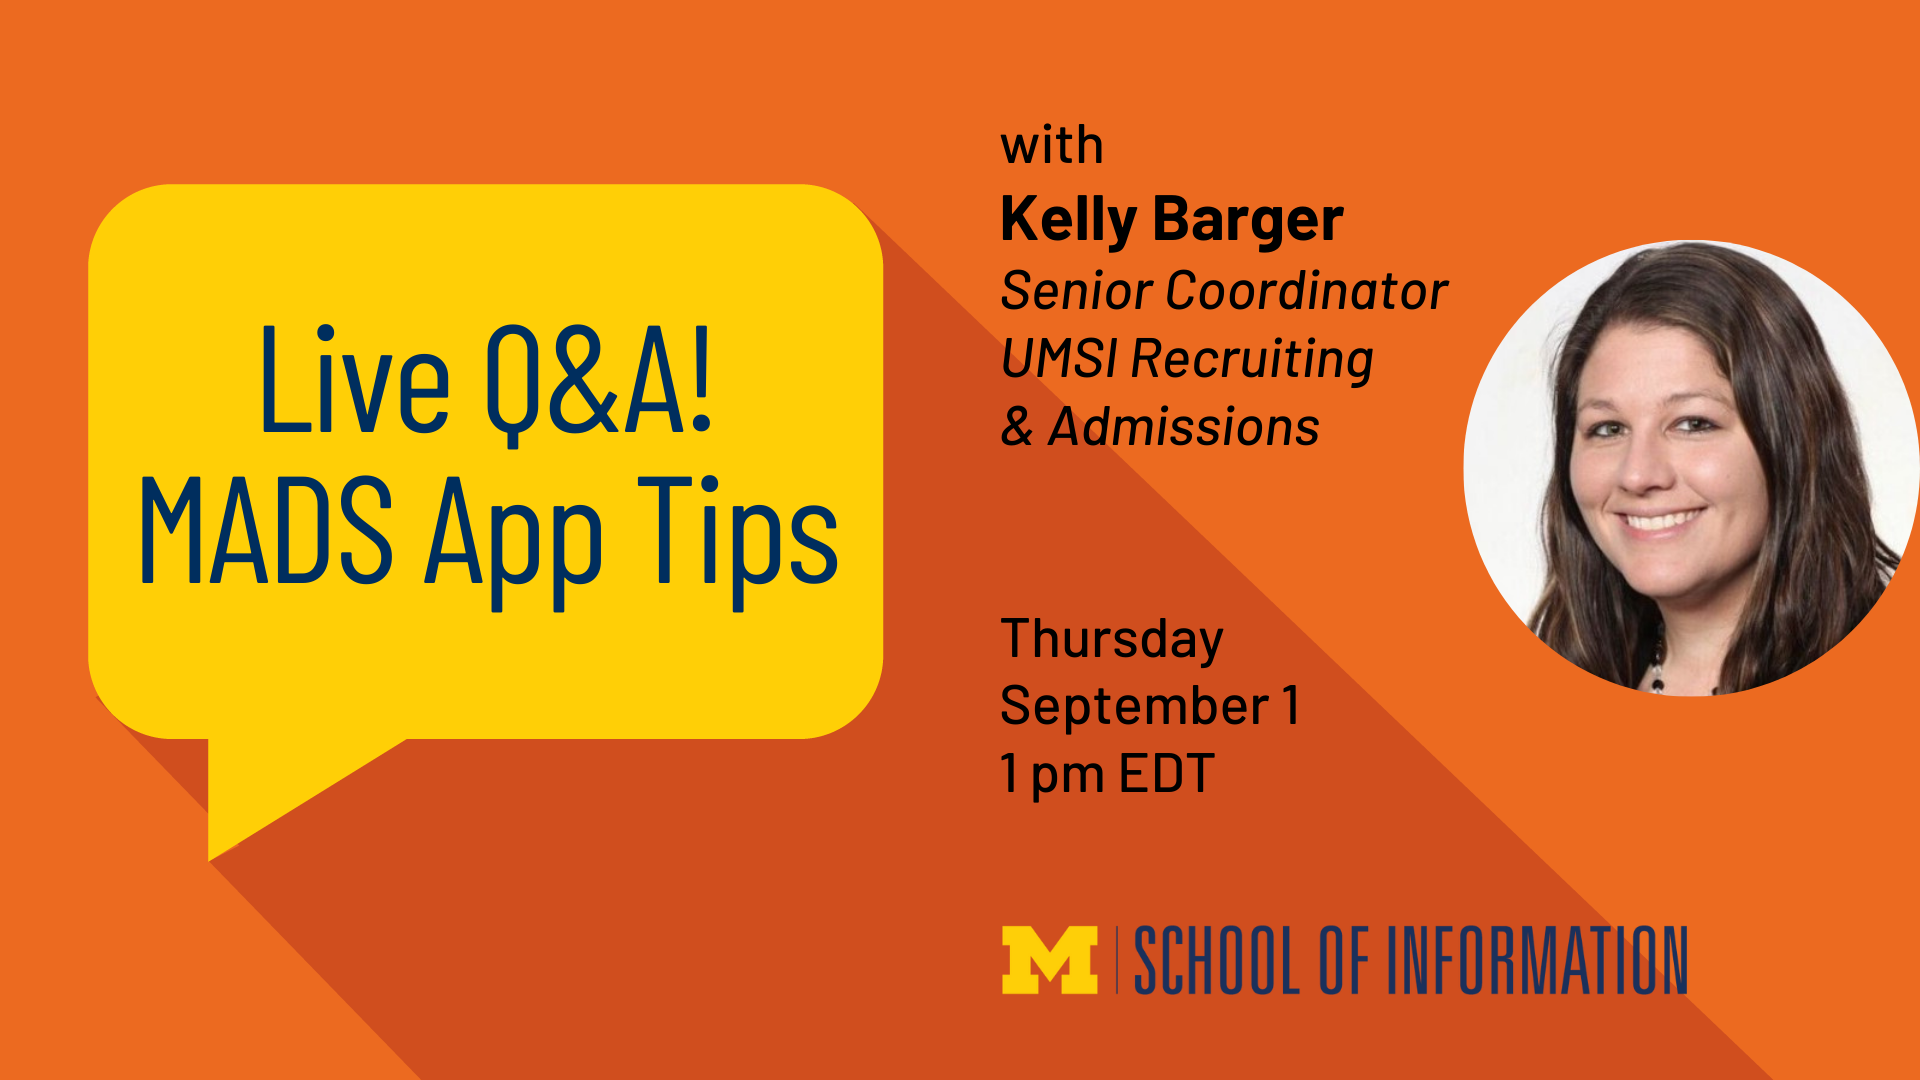 "Live Q&A! MADS App Tips with Kelly Barger, Senior Coordinator, UMSI Recruiting & Admissions. Thursday, September 1. 1 pm EDT."